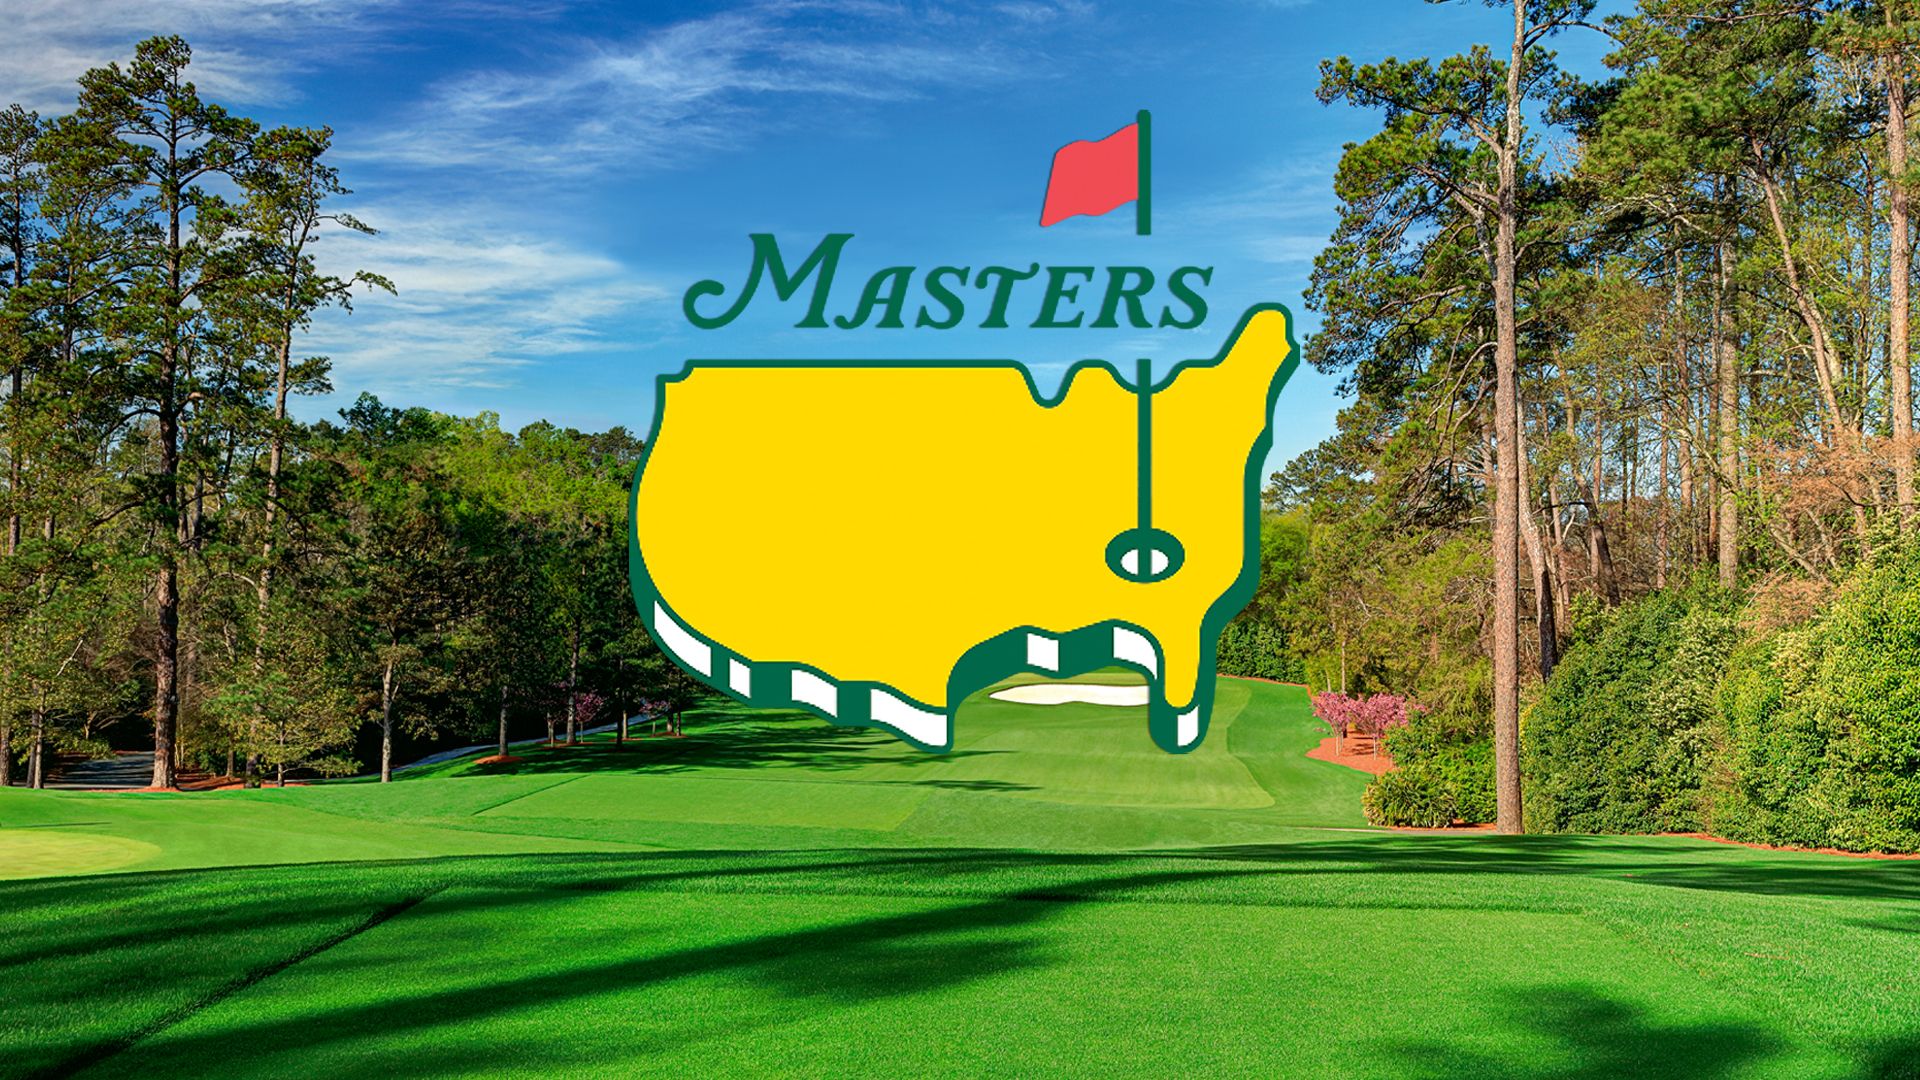 Our Six Picks for the 2021 Masters & TeeTimes